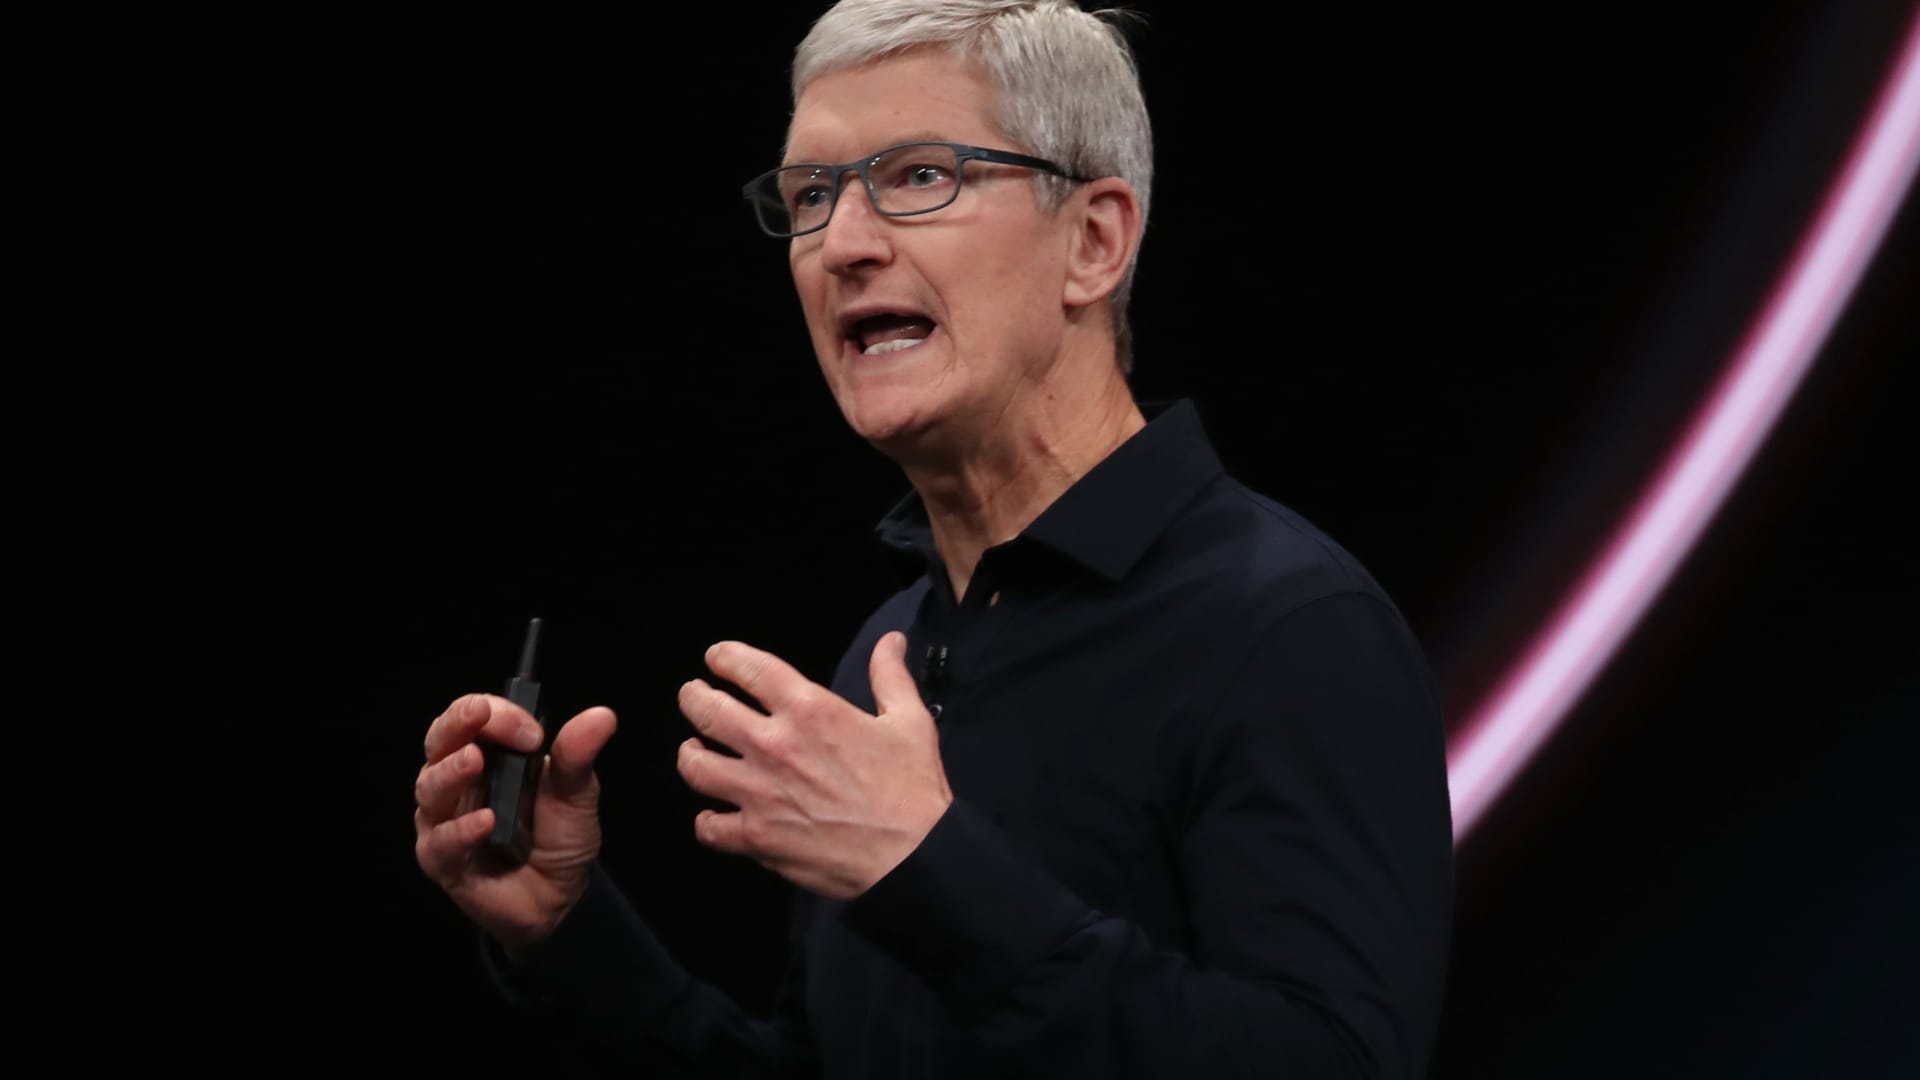 Read Apple CEO Tim Cook's open letter on racism: 'We must do more'